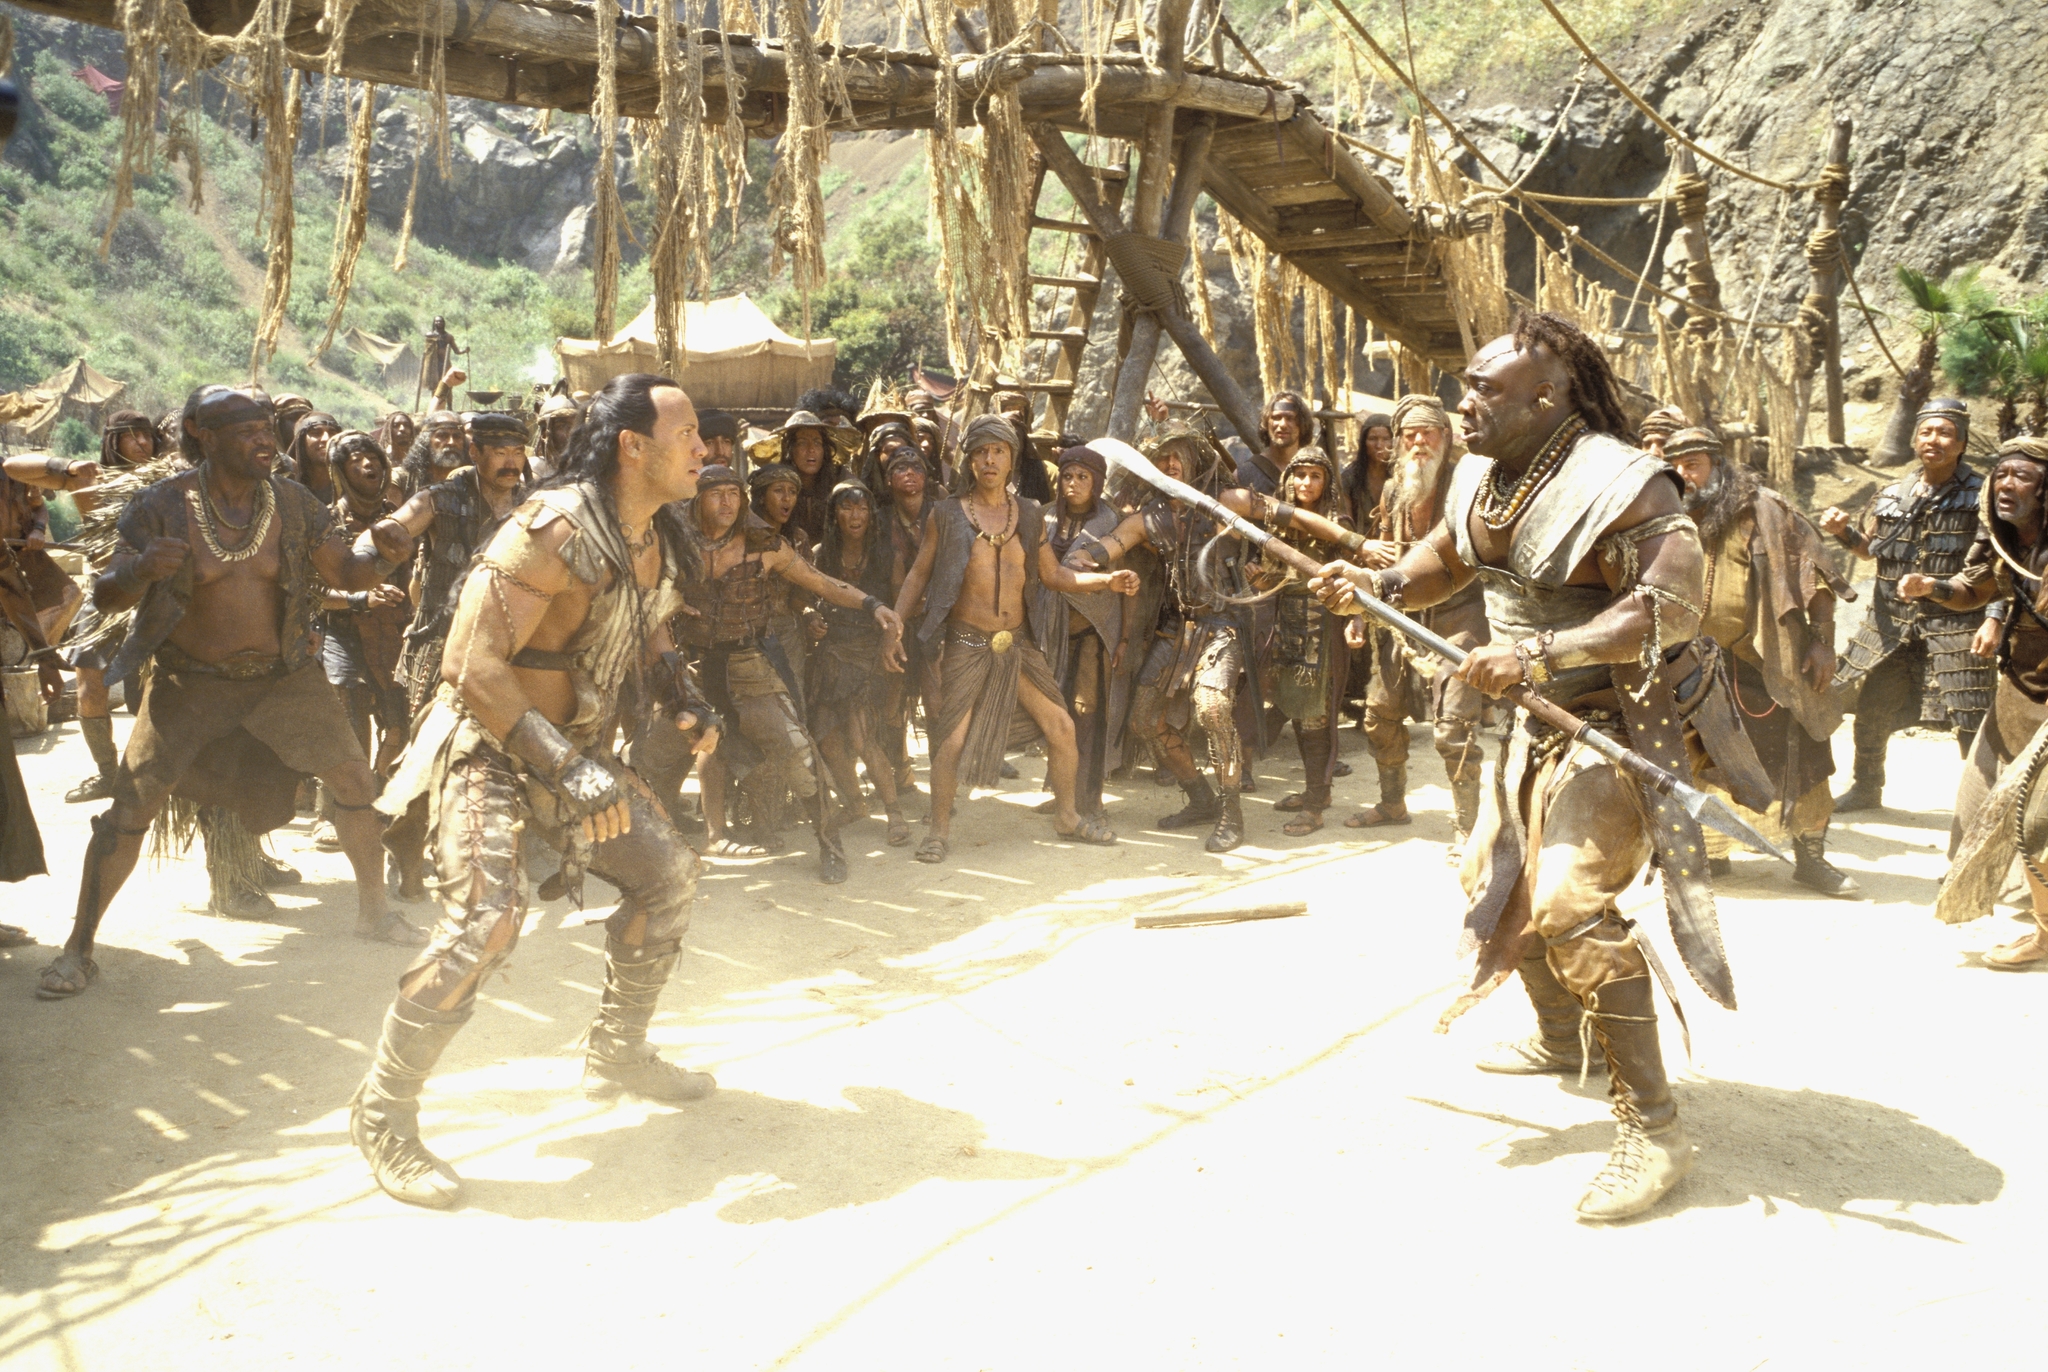 Michael Clarke Duncan and Dwayne Johnson in The Scorpion King (2002)